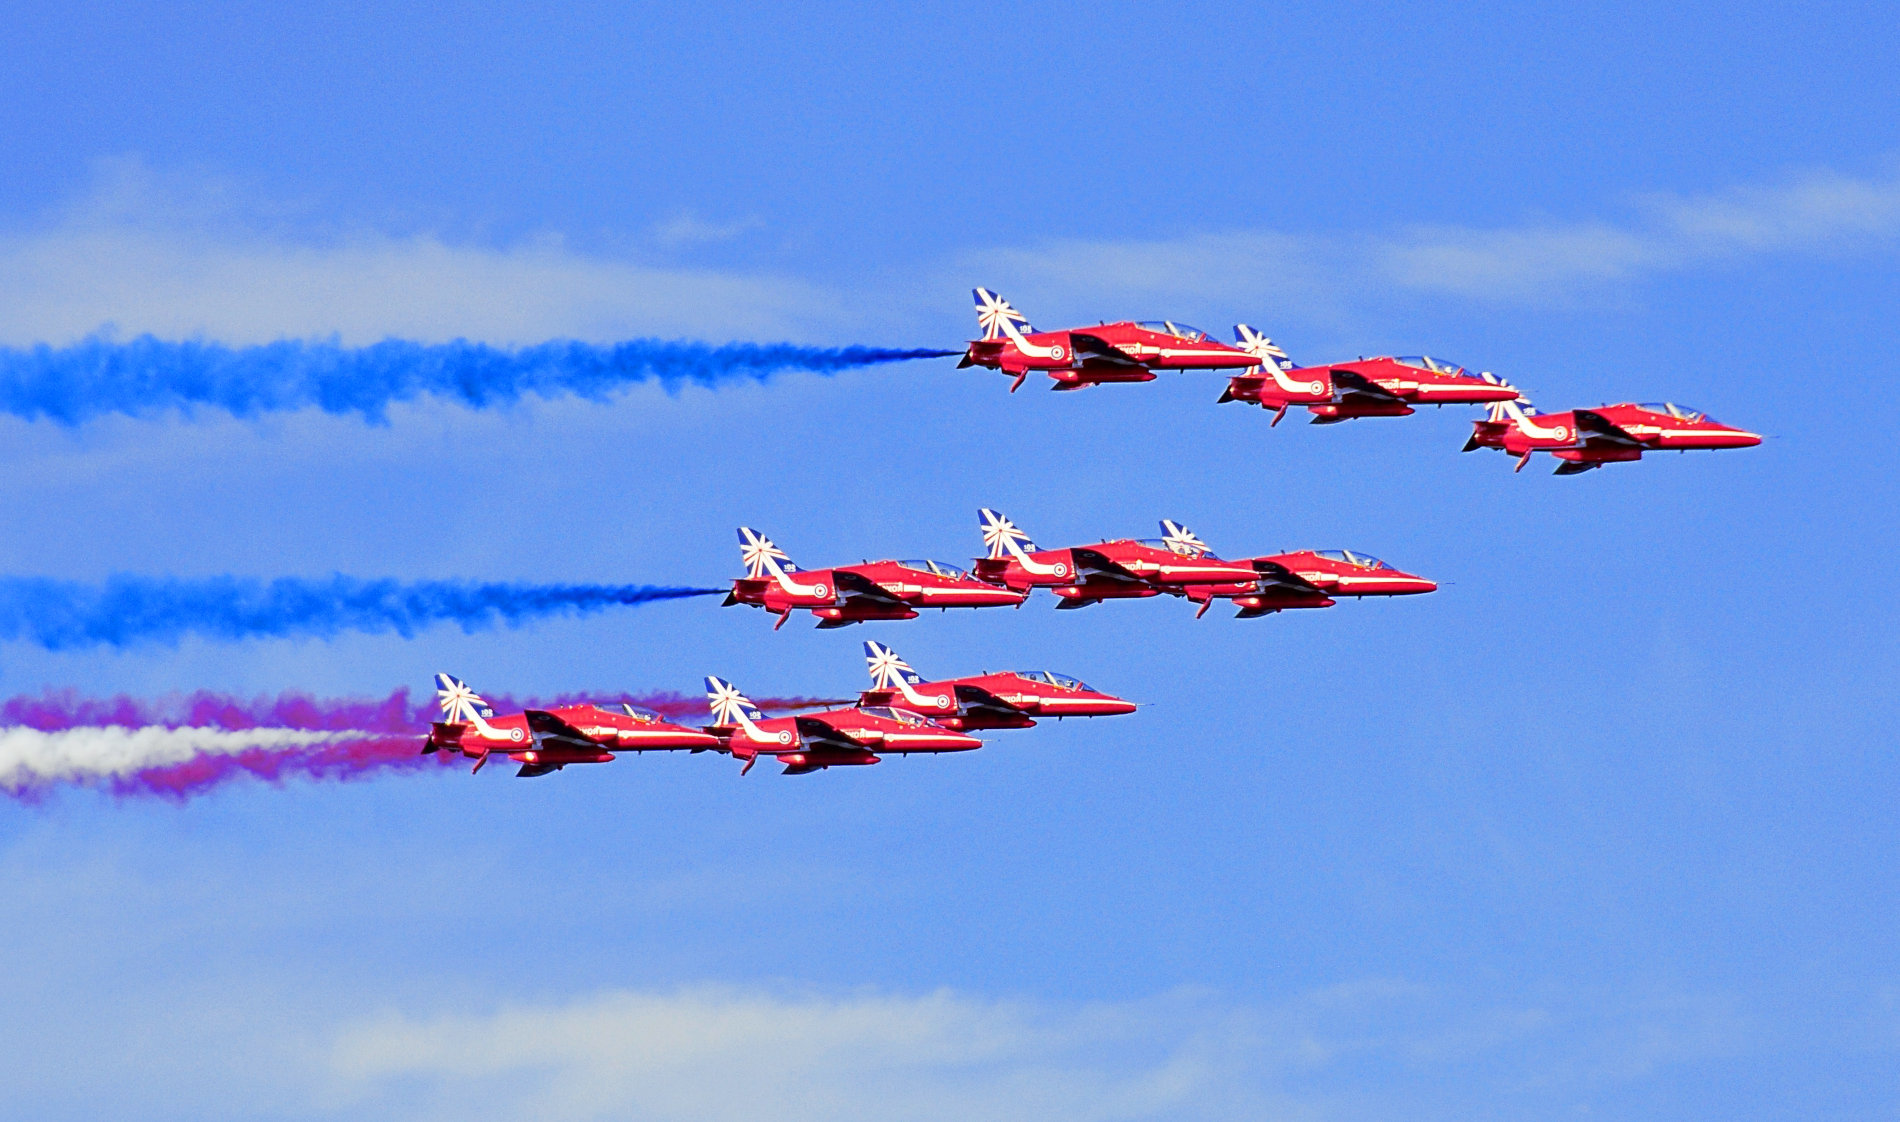 Image of the Red Arrows.